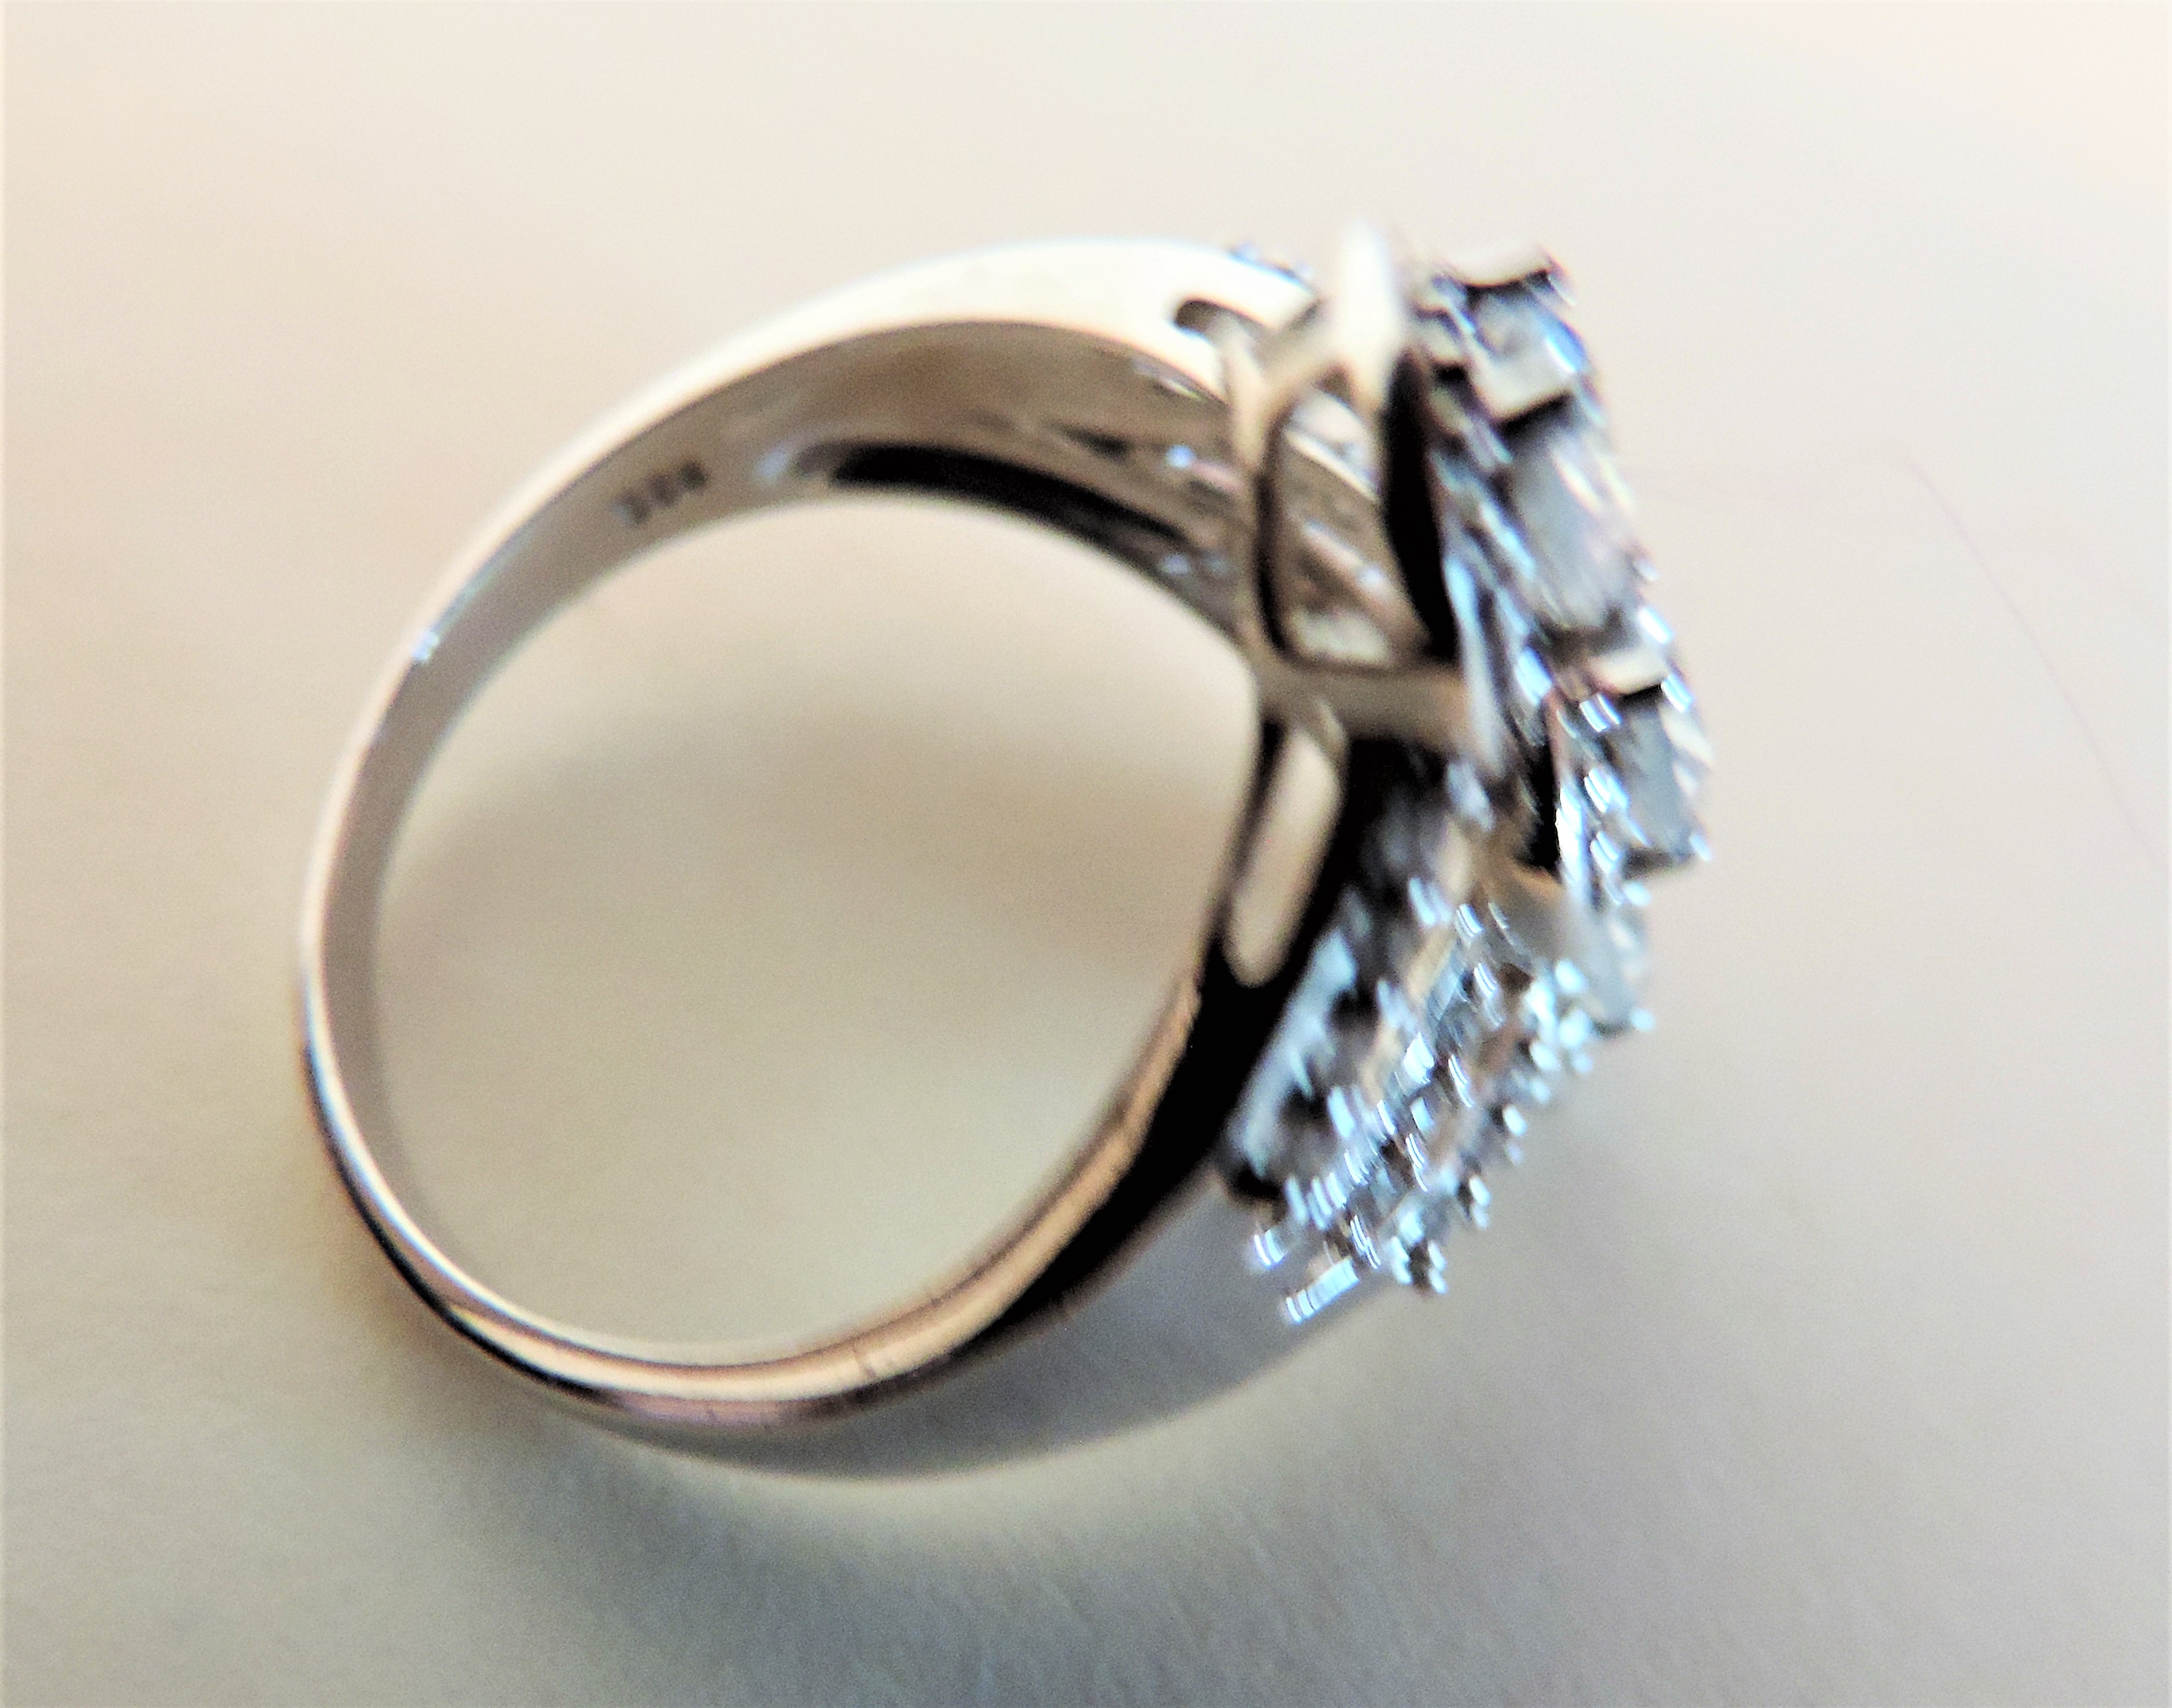 925 Sterling Silver 3.3carat White Topaz Ring - Image 5 of 5